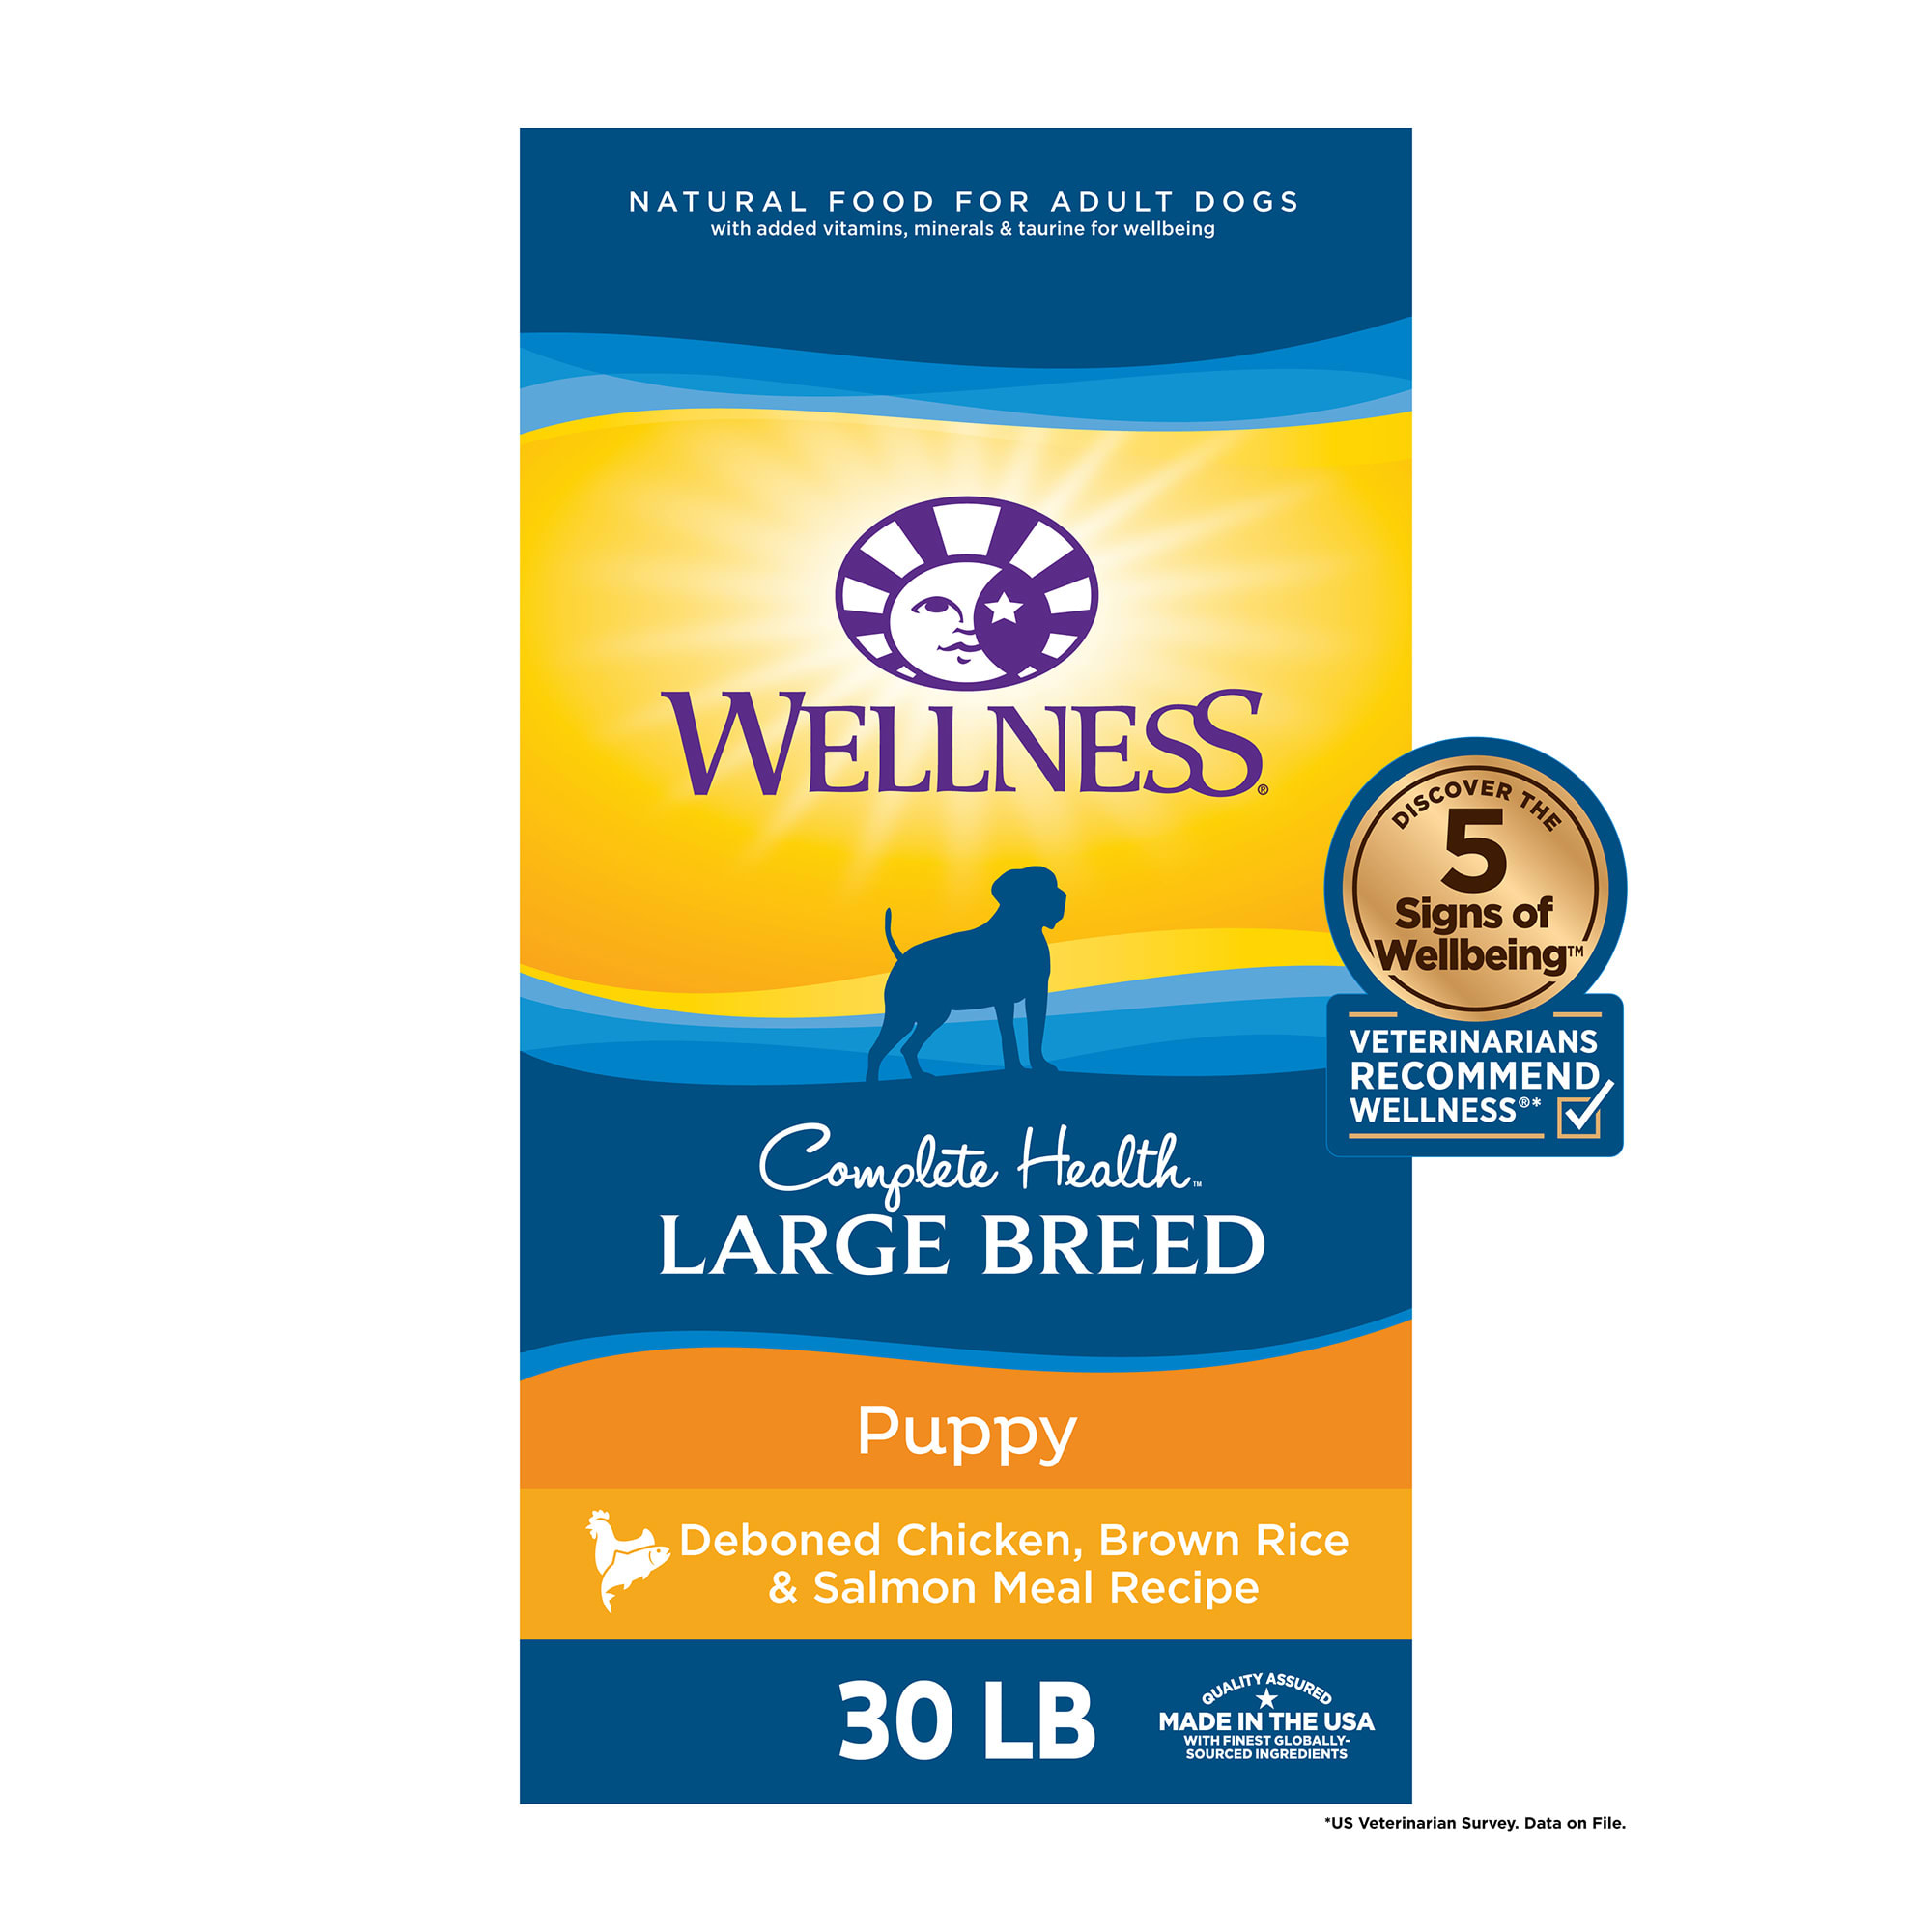 Photos - Dog Food Wellness Complete Health Natural Large Breed Puppy Health Recipe 